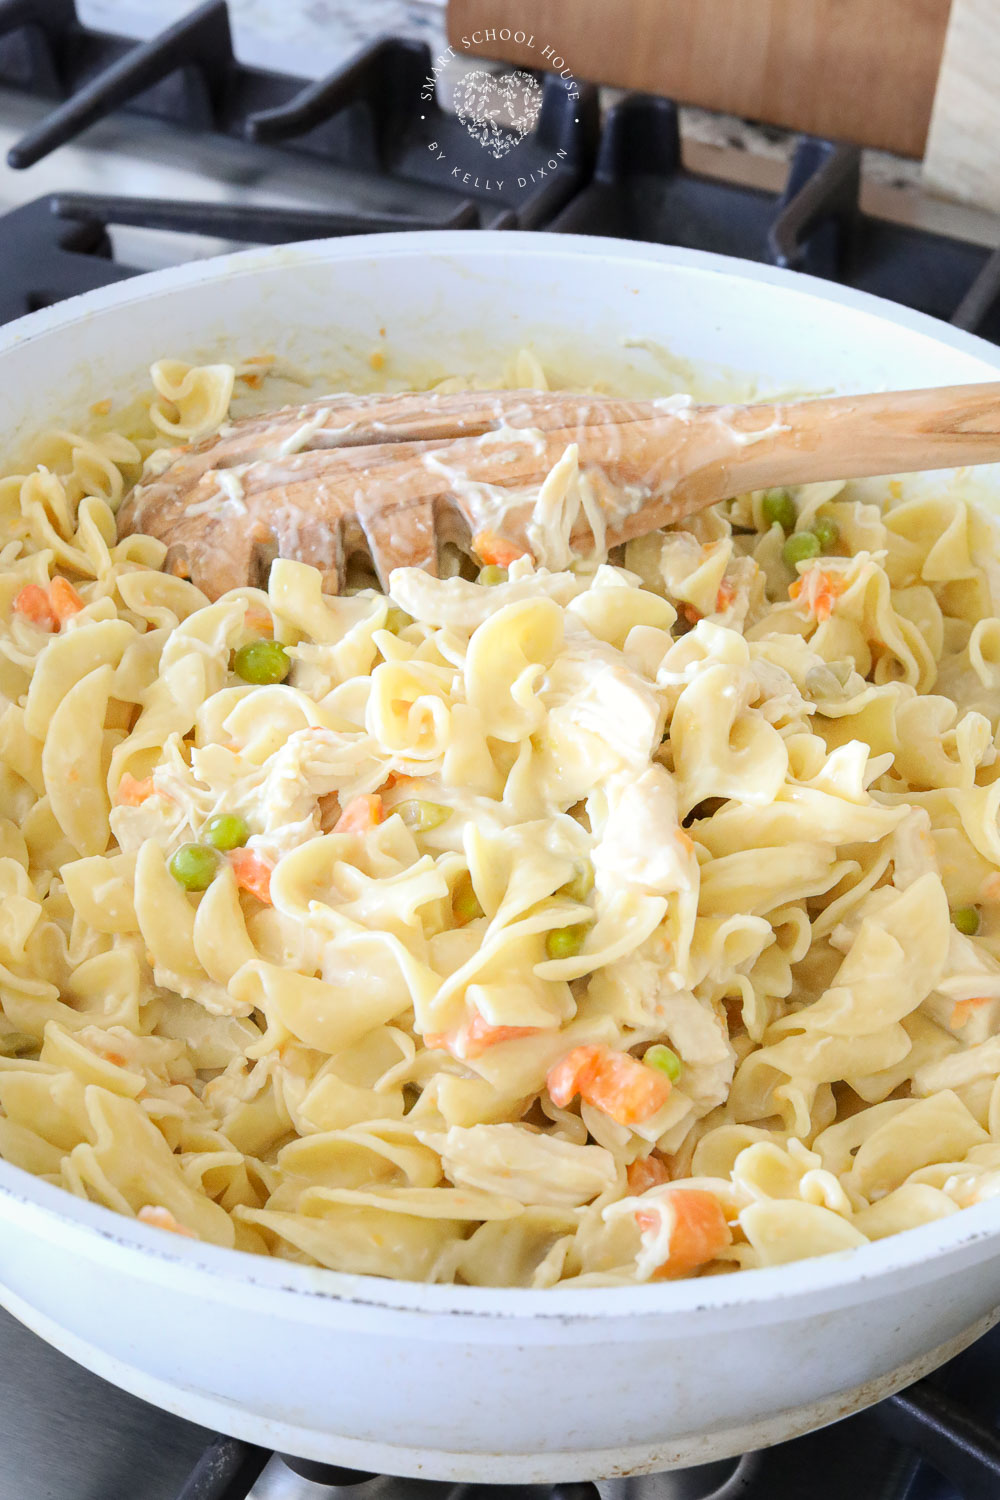 Chicken Pot Pie Pasta is a classic chicken pot pie turned into an easy-to-make flavorful pasta dish! Creamy, flavorful, and filling! 